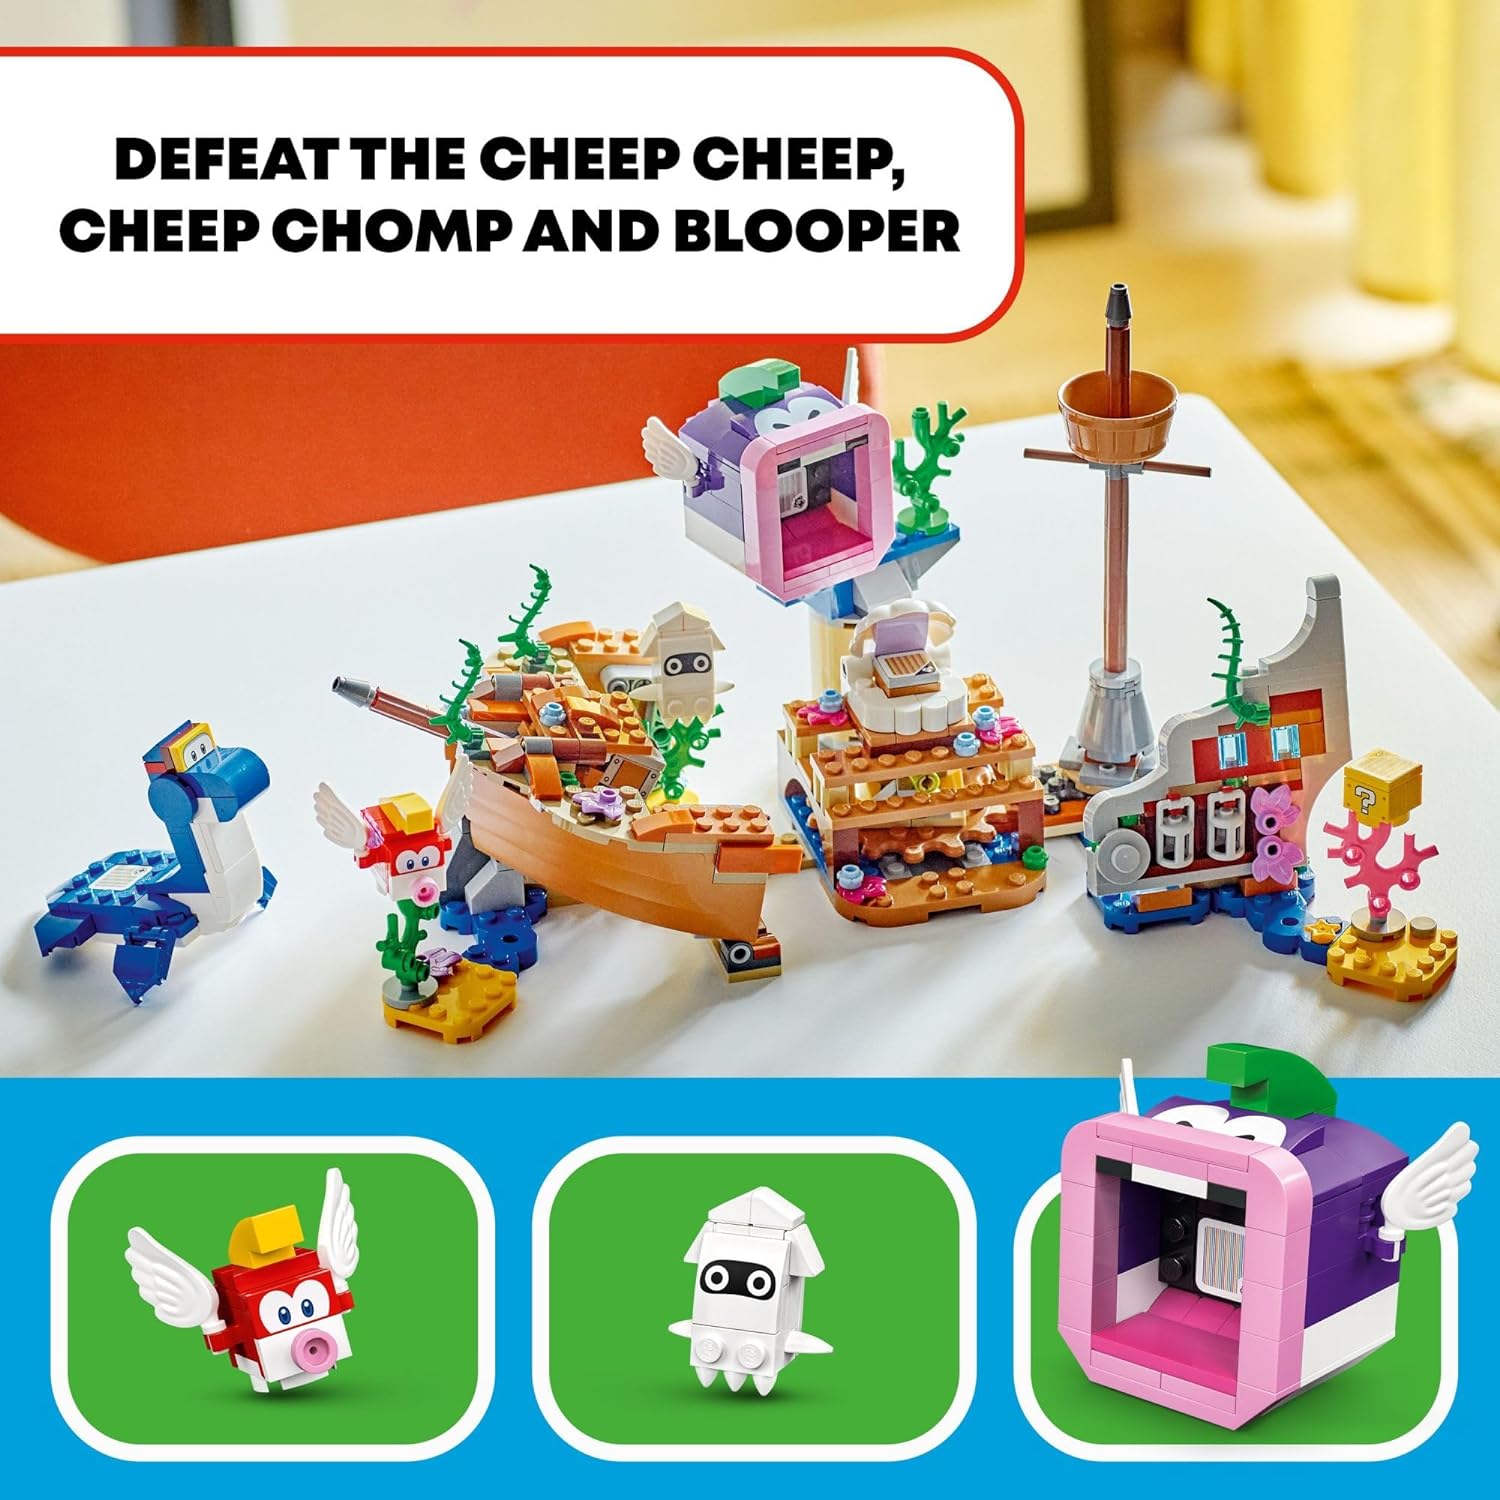 LEGO 71432 Super Mario Dorrie's Sunken Shipwreck Adventure Expansion Set, Super Mario Collectible Toy for Kids with Cheep Cheep, Cheep Chomp and Blooper Figures.